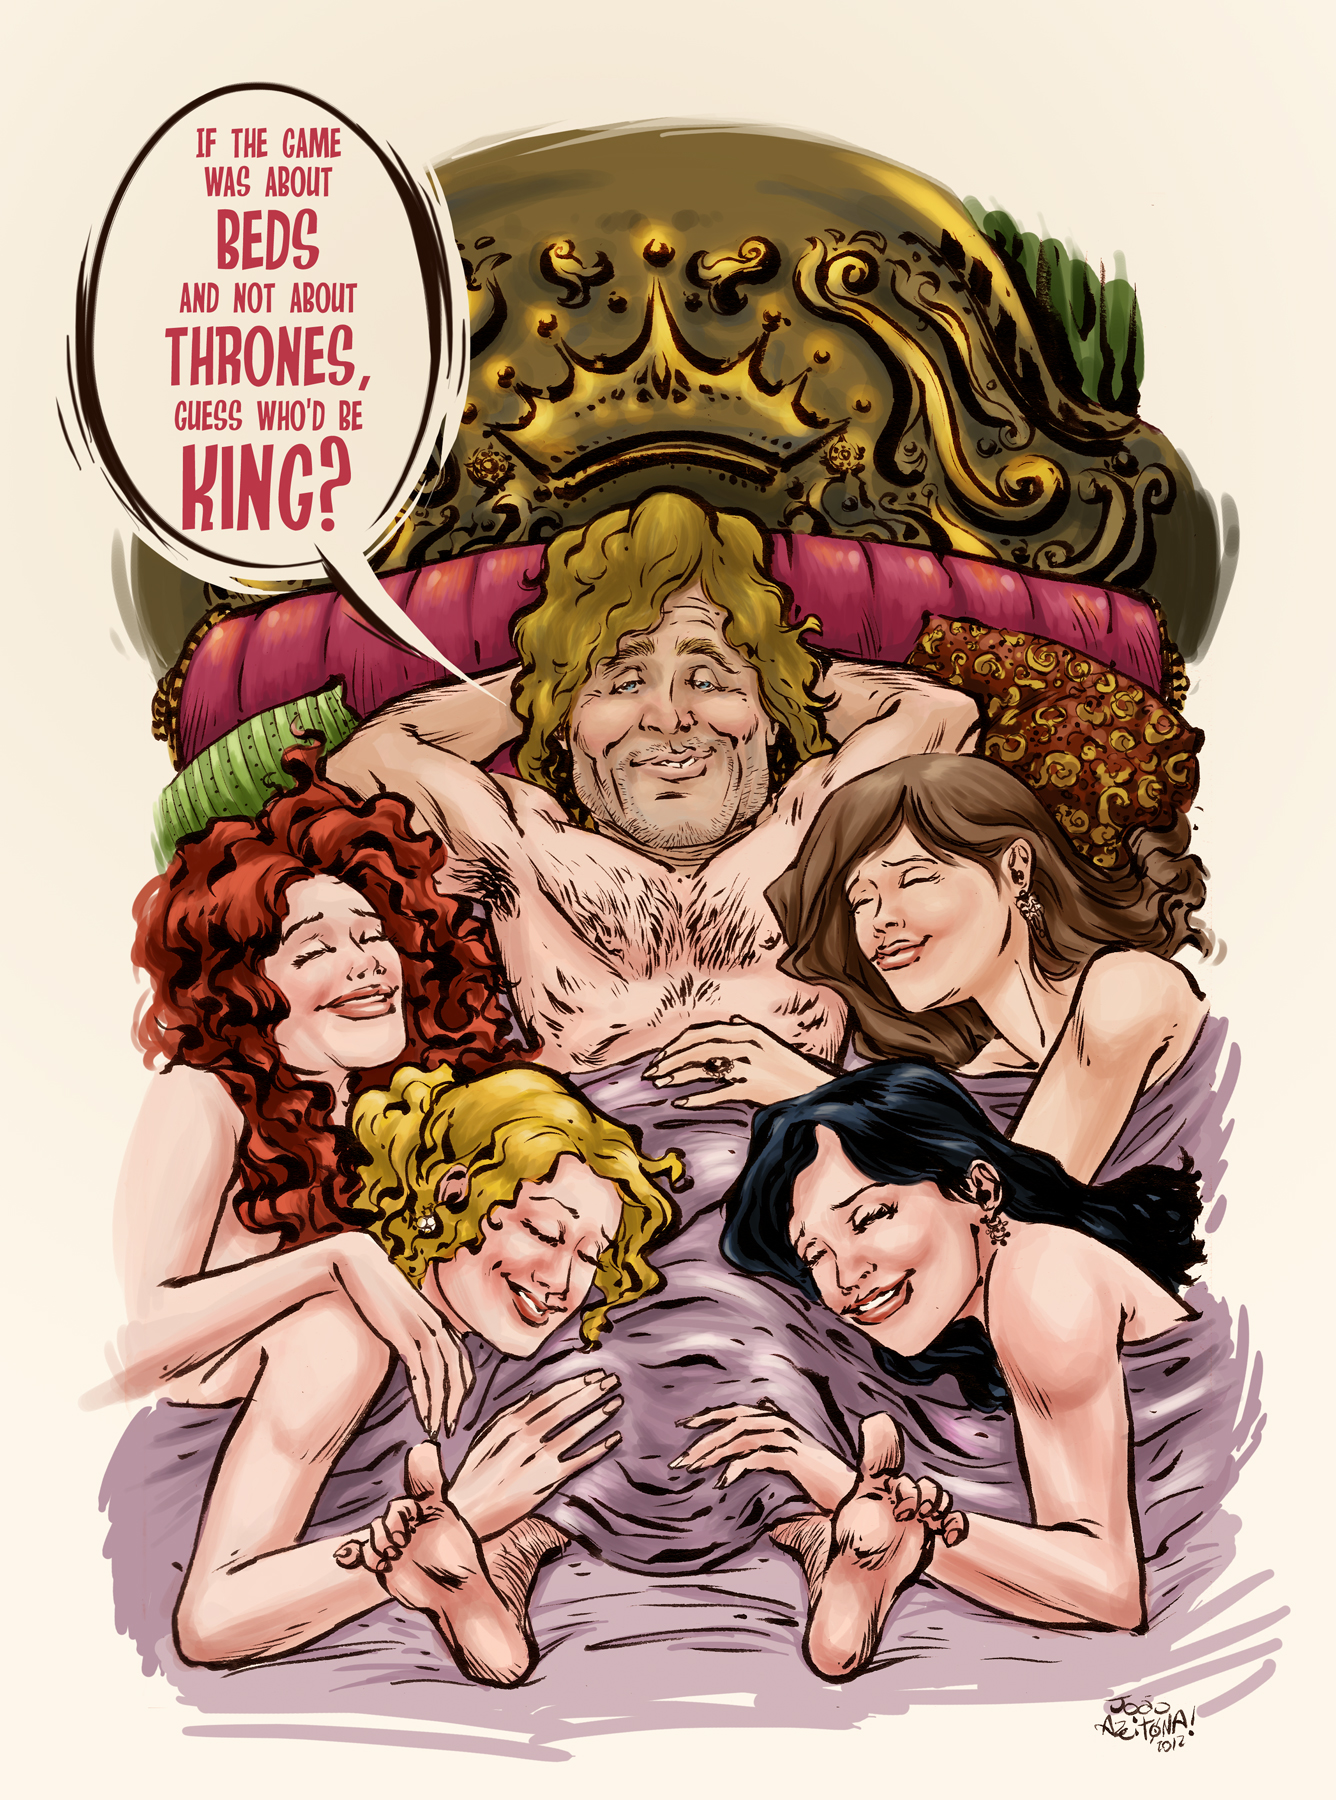 Lannister, find more porn picture tyrion lannister to ashcan all stars by a...